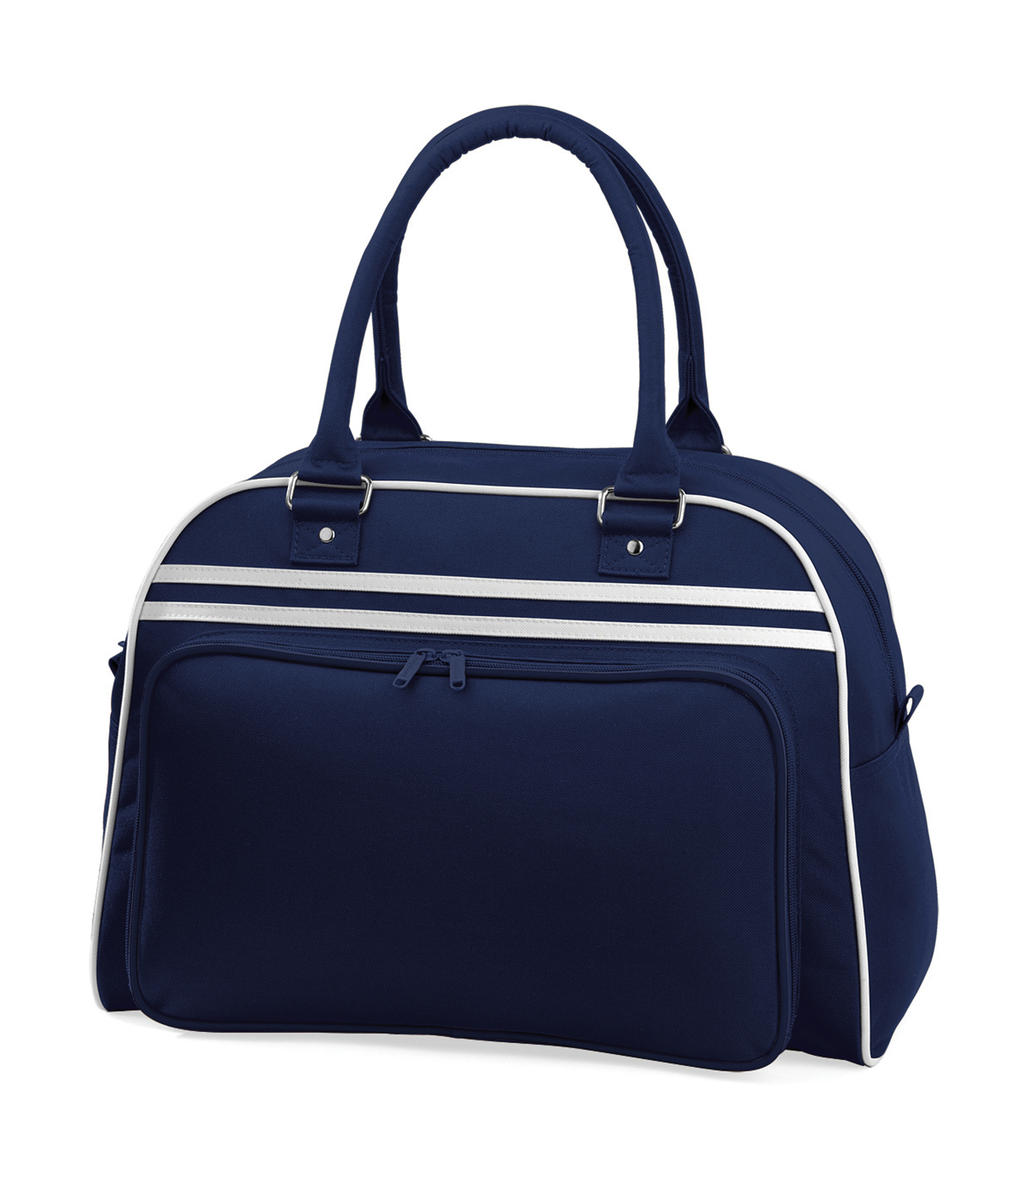  Retro Bowling Bag in Farbe French Navy/White